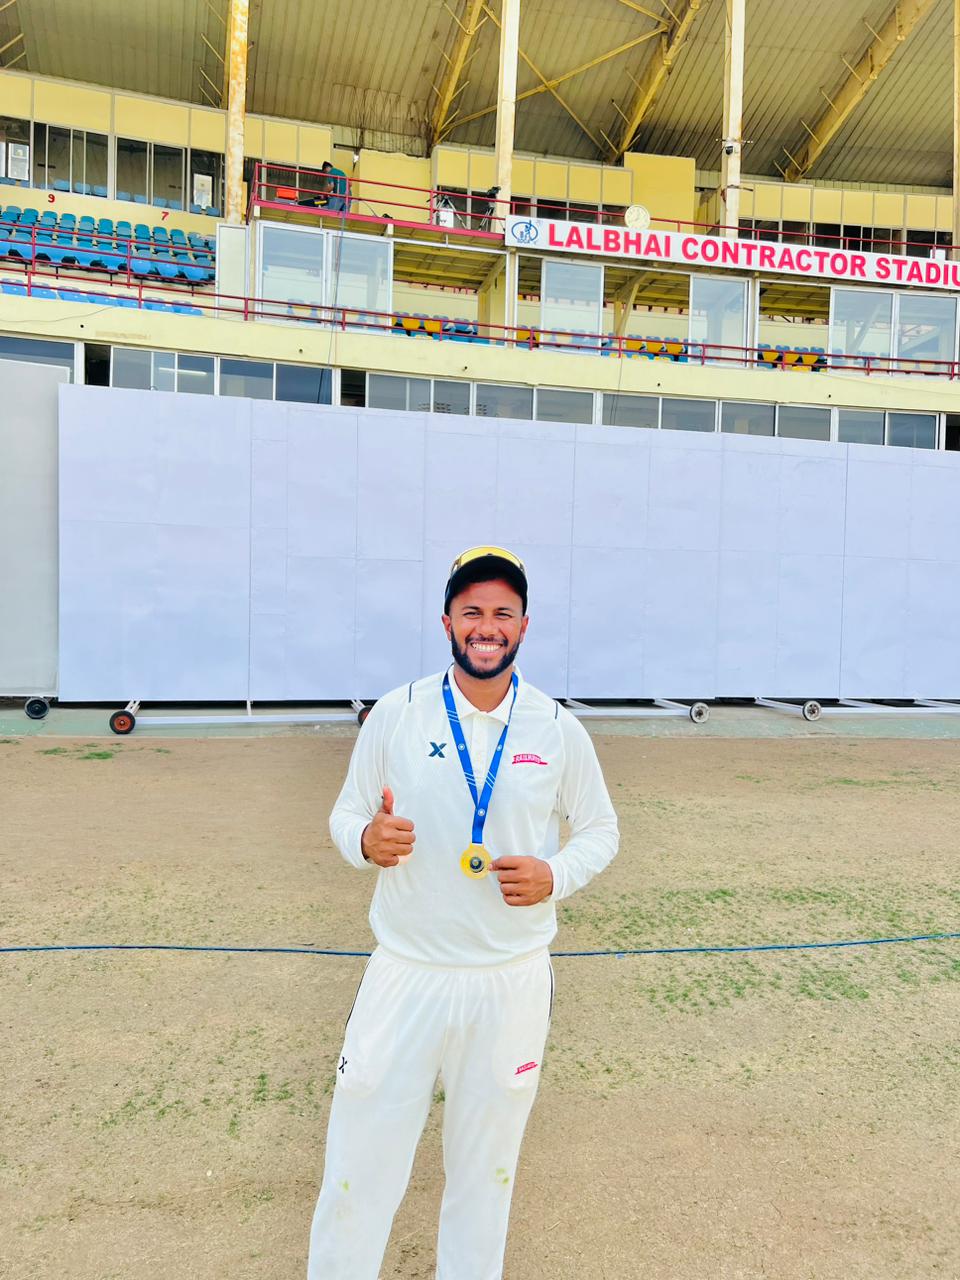 Shri Akash Pandey, a Metroman, playing for Railways in the on-going Ranji Trophy tournament has made history by claiming nine wickets in an innings against Goa. 